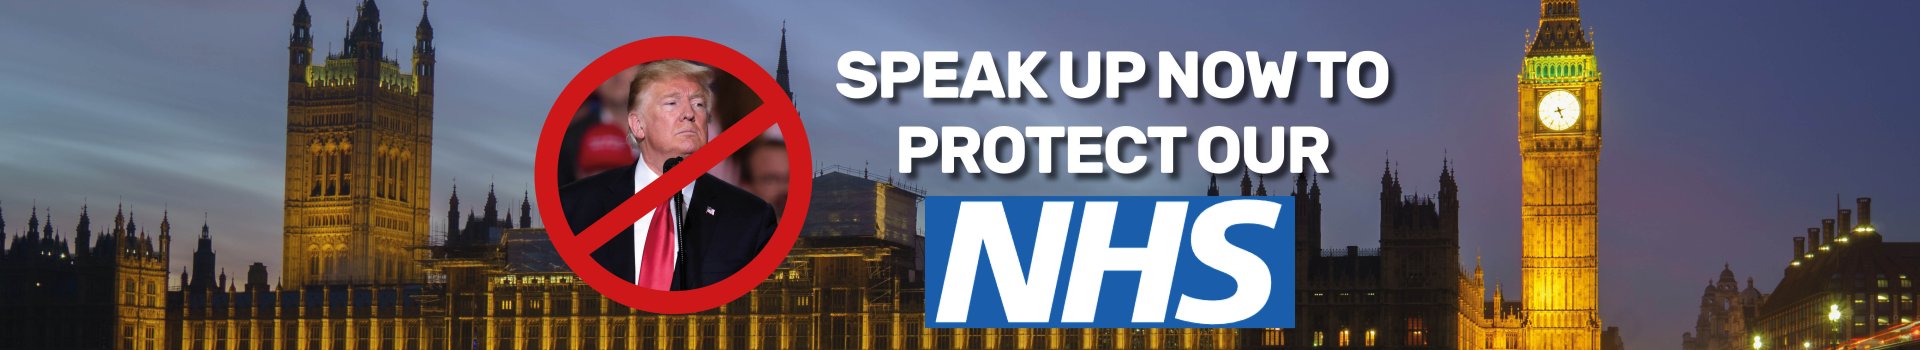 Speak up now to protect our NHS